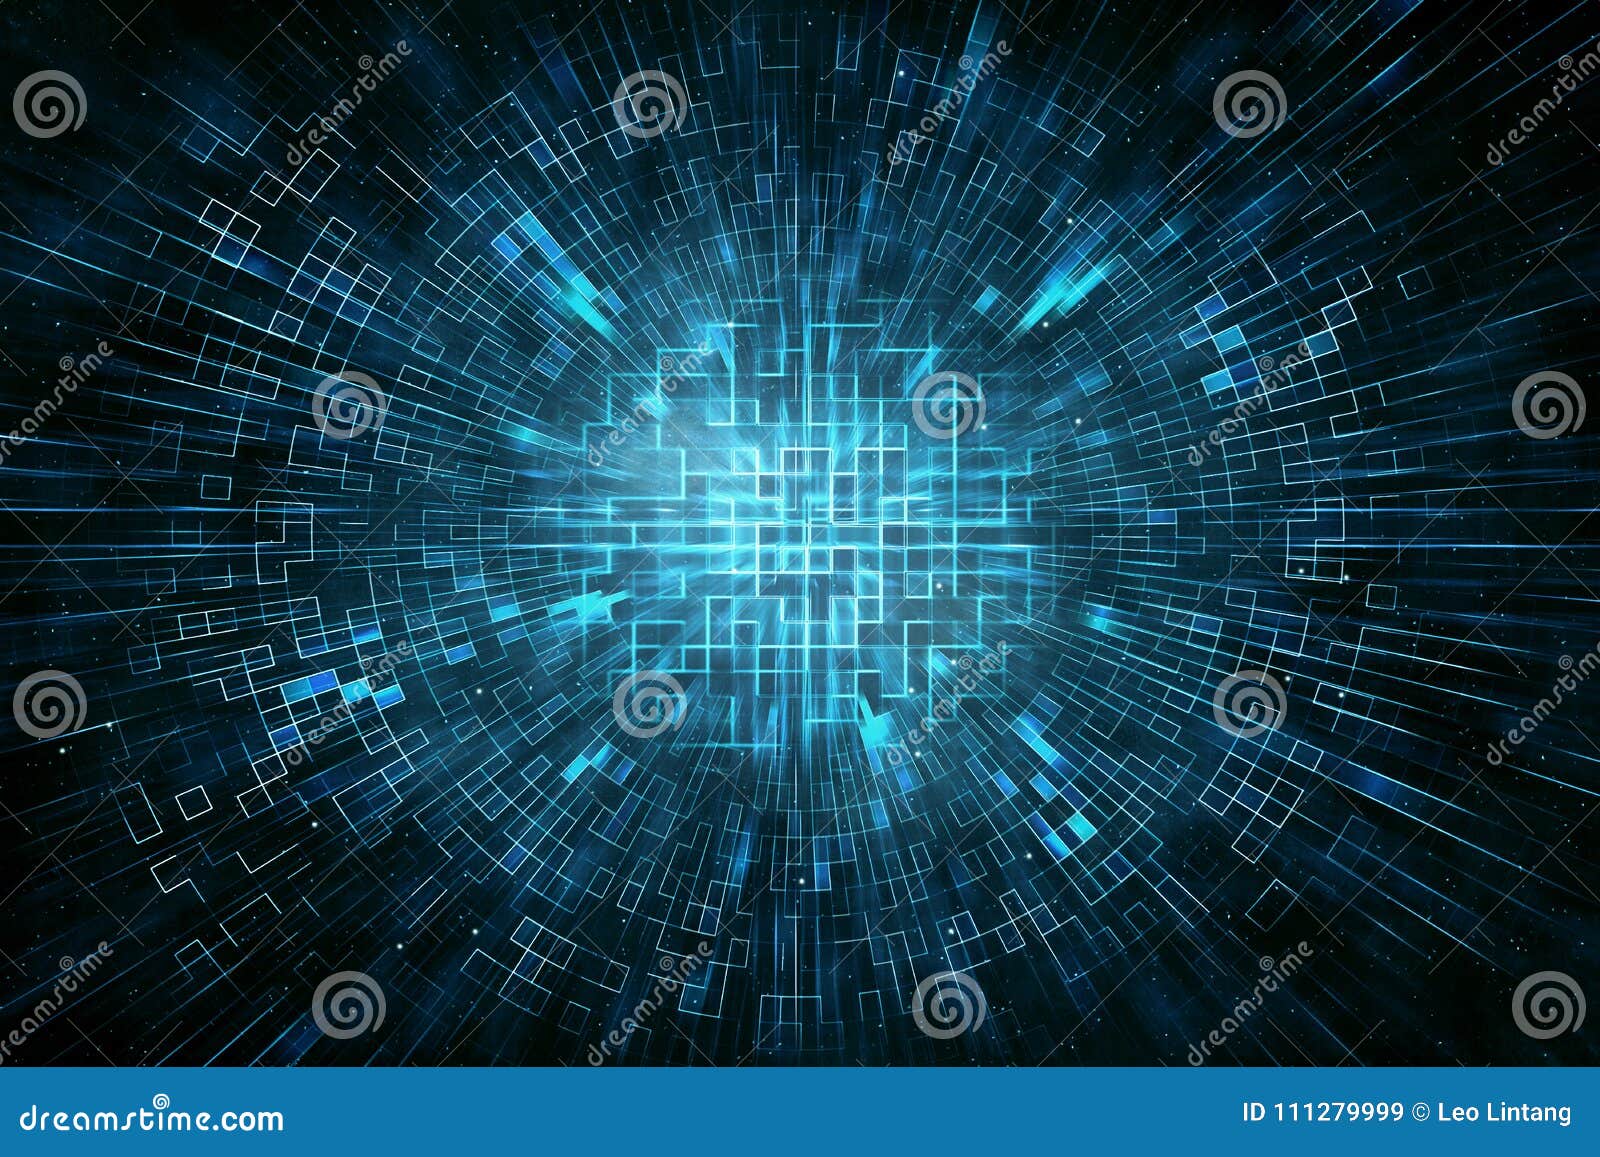 techno circle abstract background